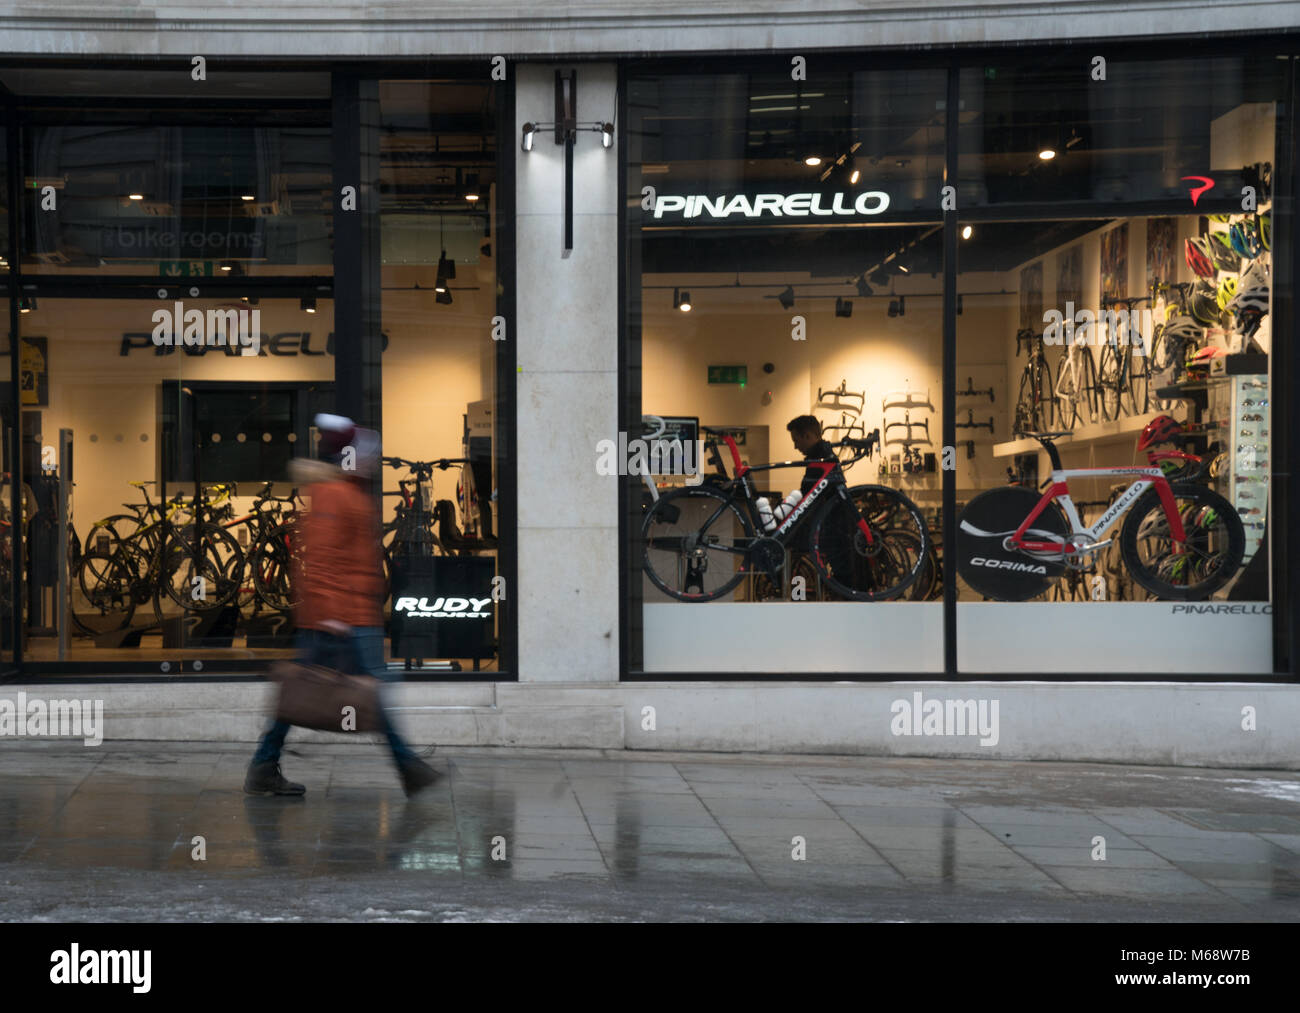 Following the news of two high street retailers going out of business, there are fears for others. A view of the Pinarello retailer in Regents Street  Stock Photo